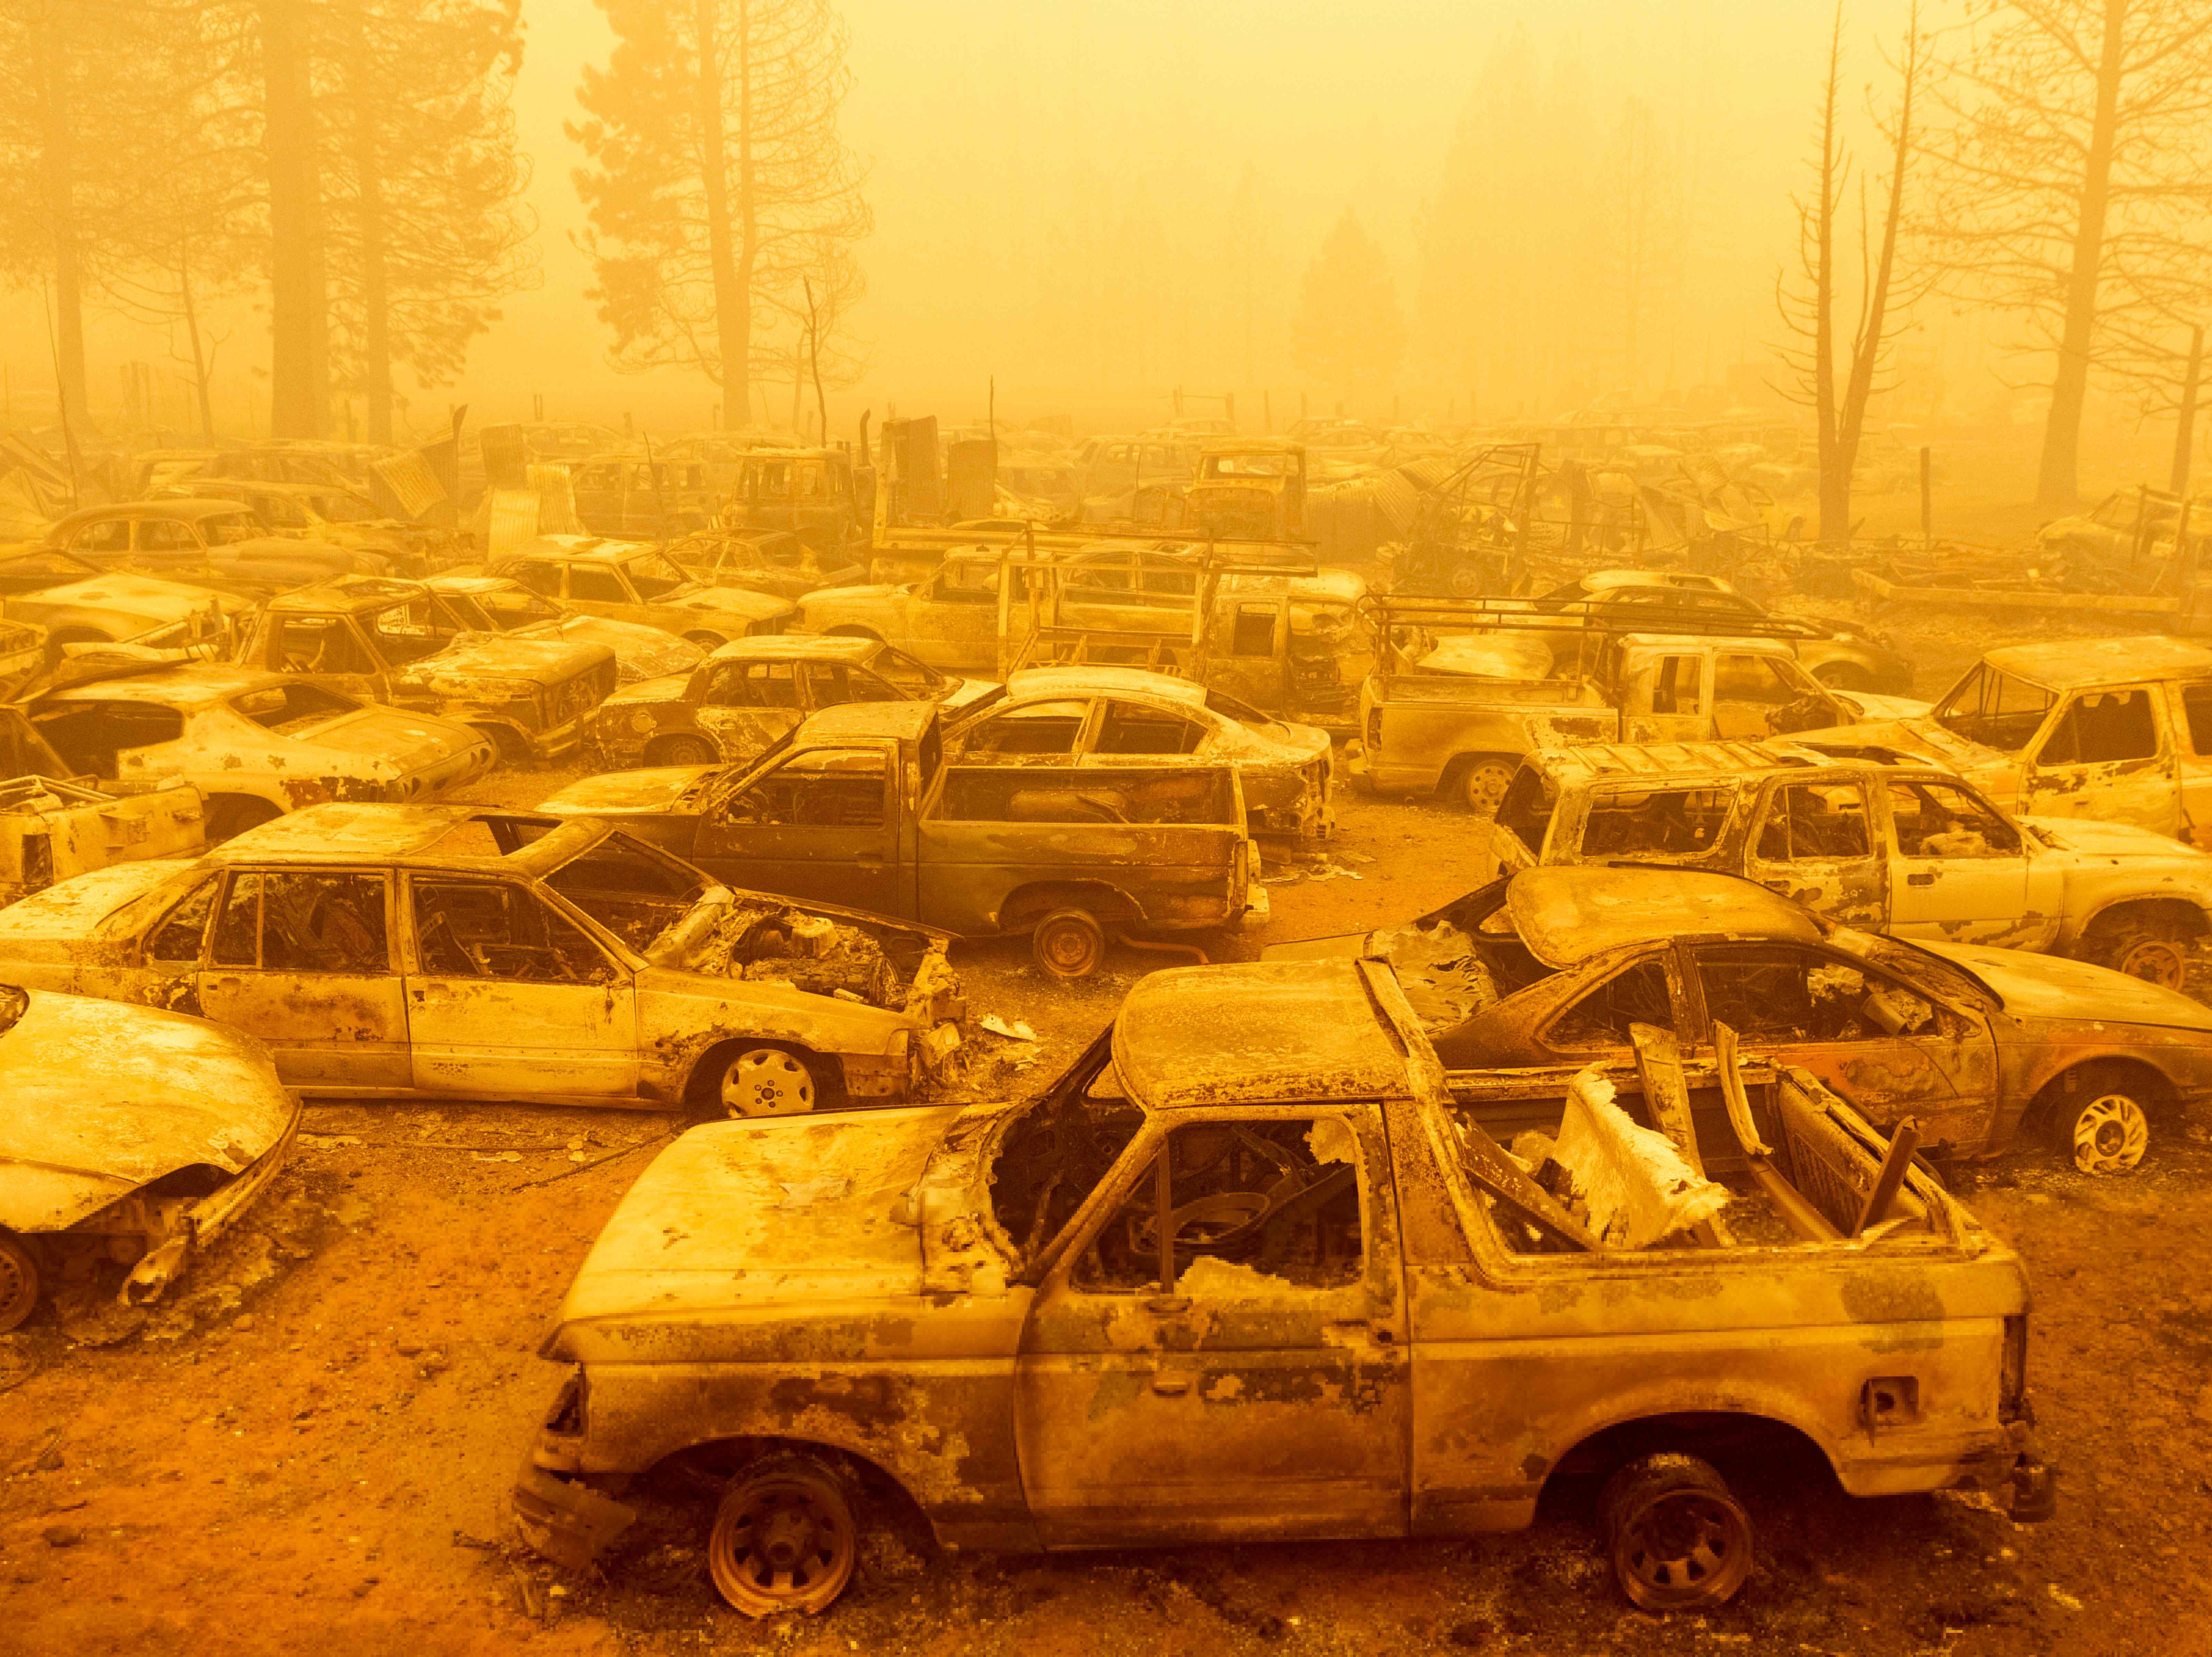 Dozens of burned vehicles rest in heavy smoke during the Dixie fire in Greenville, California on 6 August 2021